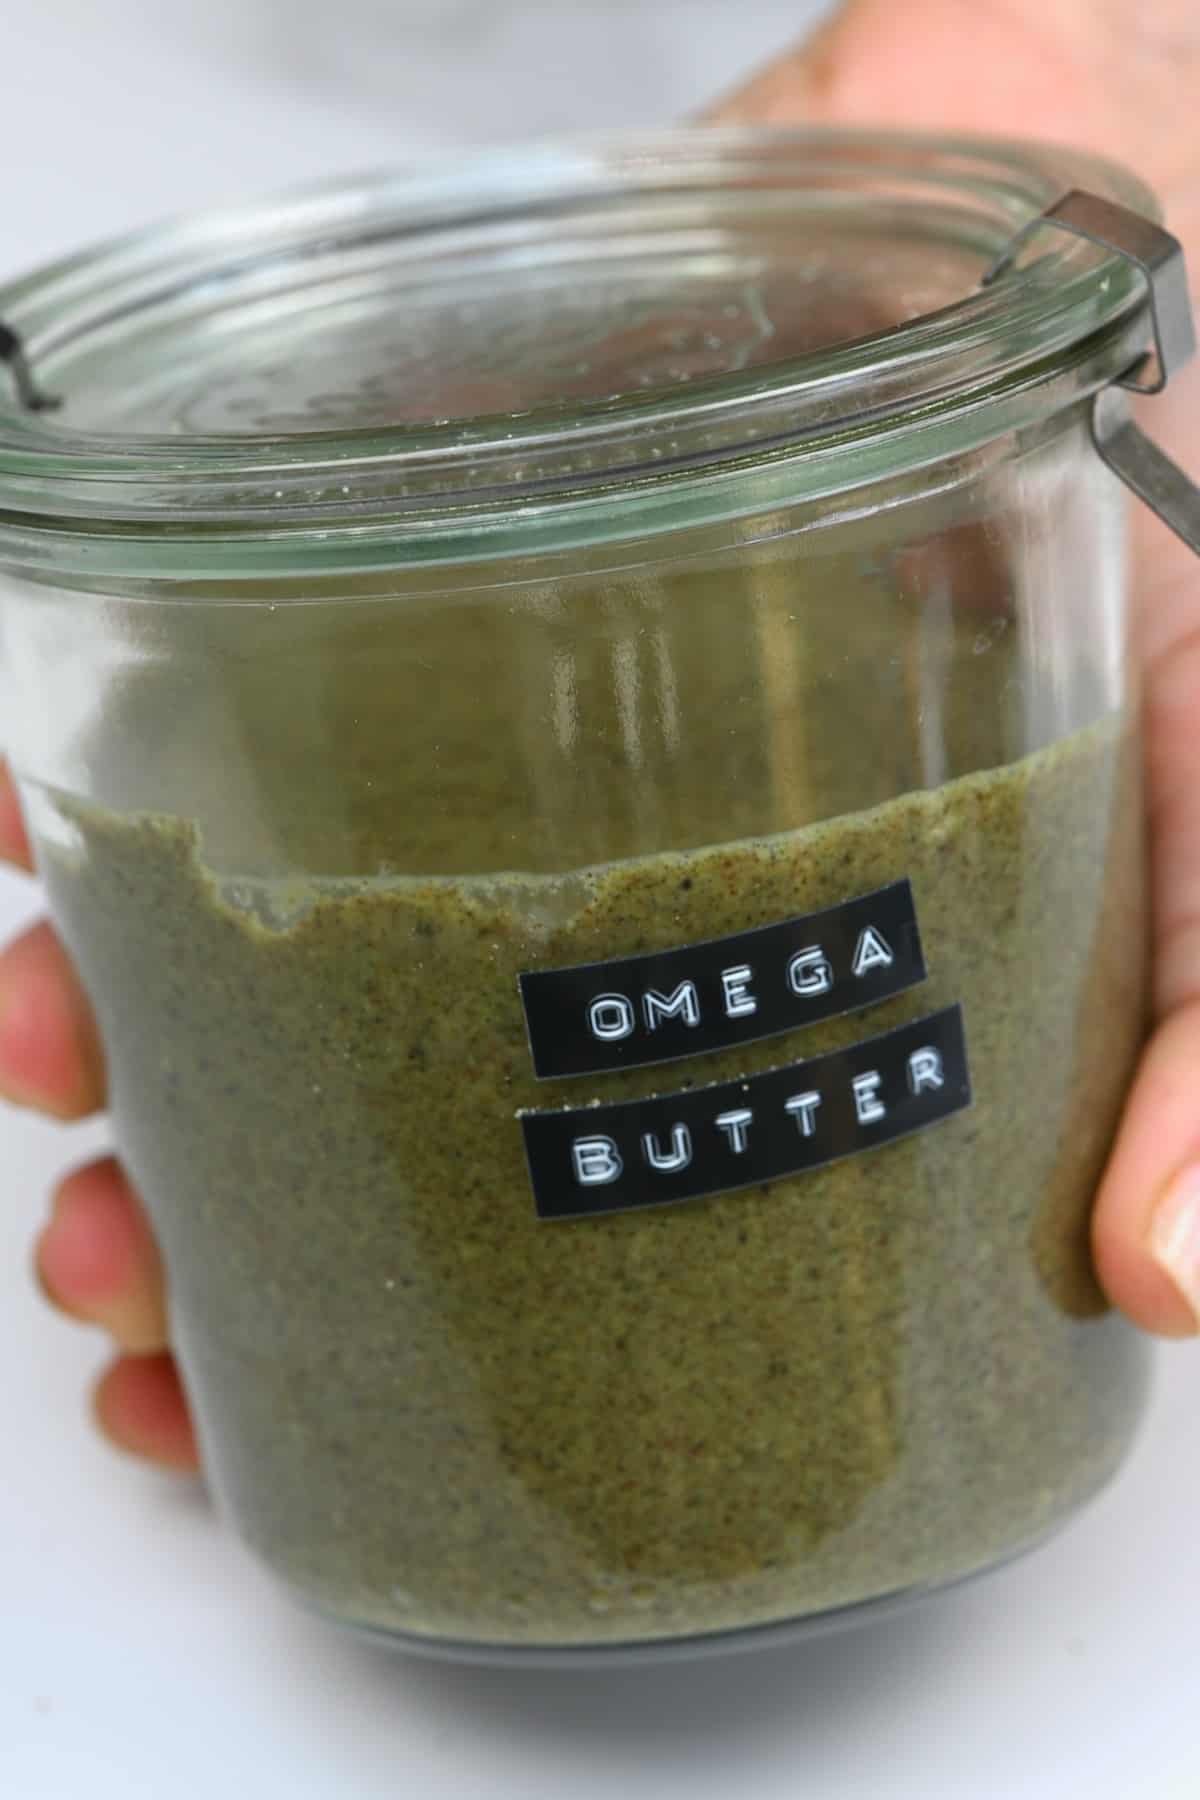 A jar with omega seed butter